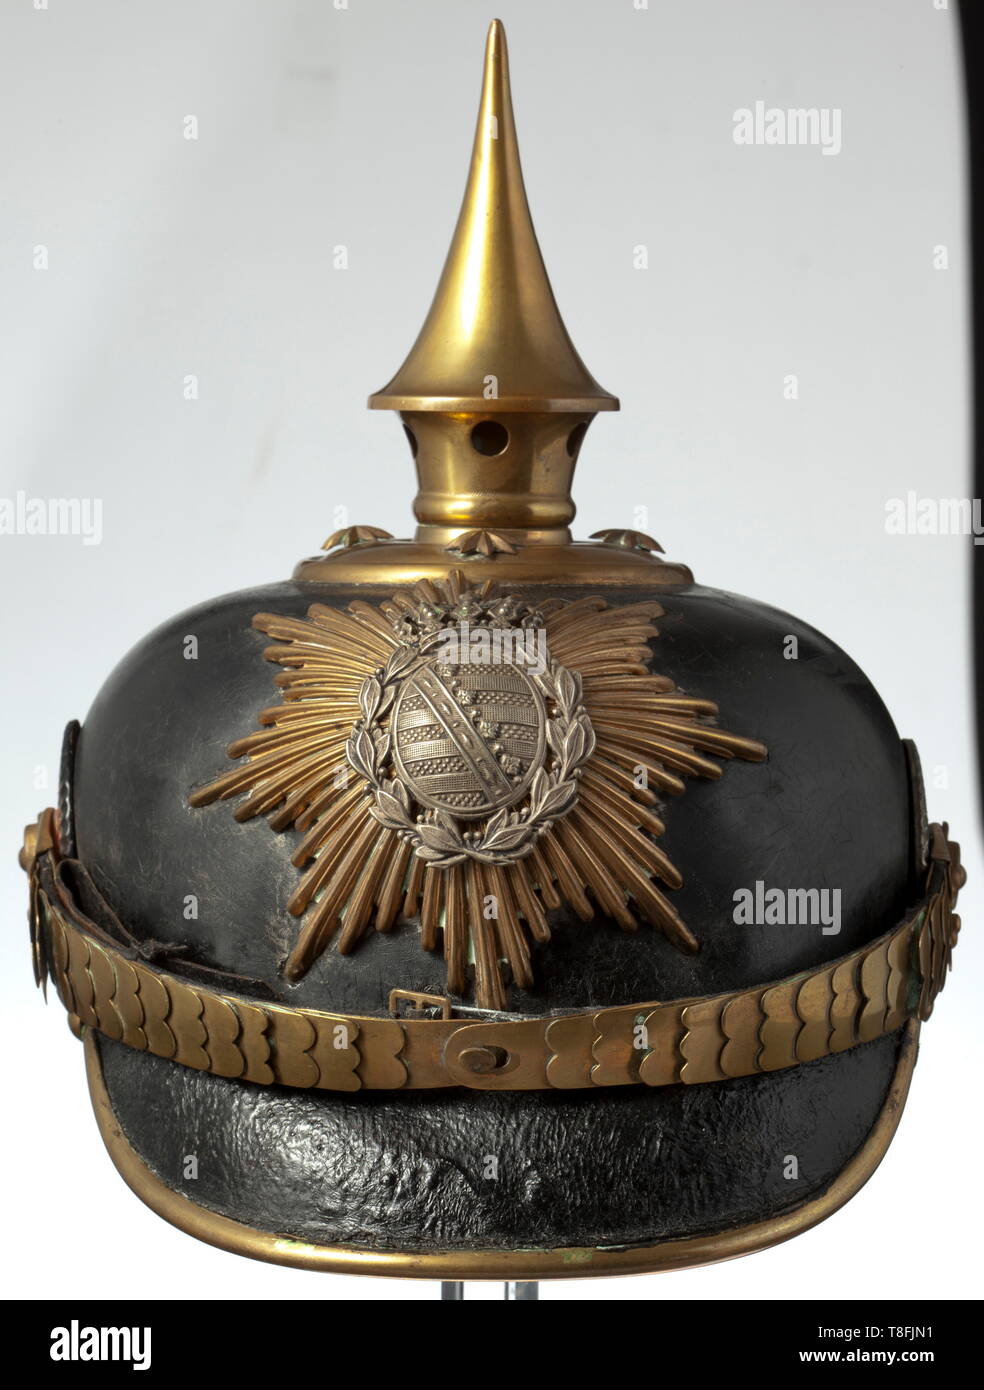 A helmet for a one-year volunteer of the infantry, circa 1900 Black painted leather skull (with craquelures) with gilt brass fittings, yellow rayed emblem with applied nickel silver coat of arms, the circular base with stars and unscrewable spike. Flat brass chinscales with leather underlay on button 91, imperial and state cockades. Brown silk rep liner and brown leather sweatband. Signs of usage and age. A beautiful, untouched piece. historic, historical, Saxony, Saxonia, Saxonian, German, Germany, 20th century, Additional-Rights-Clearance-Info-Not-Available Stock Photo